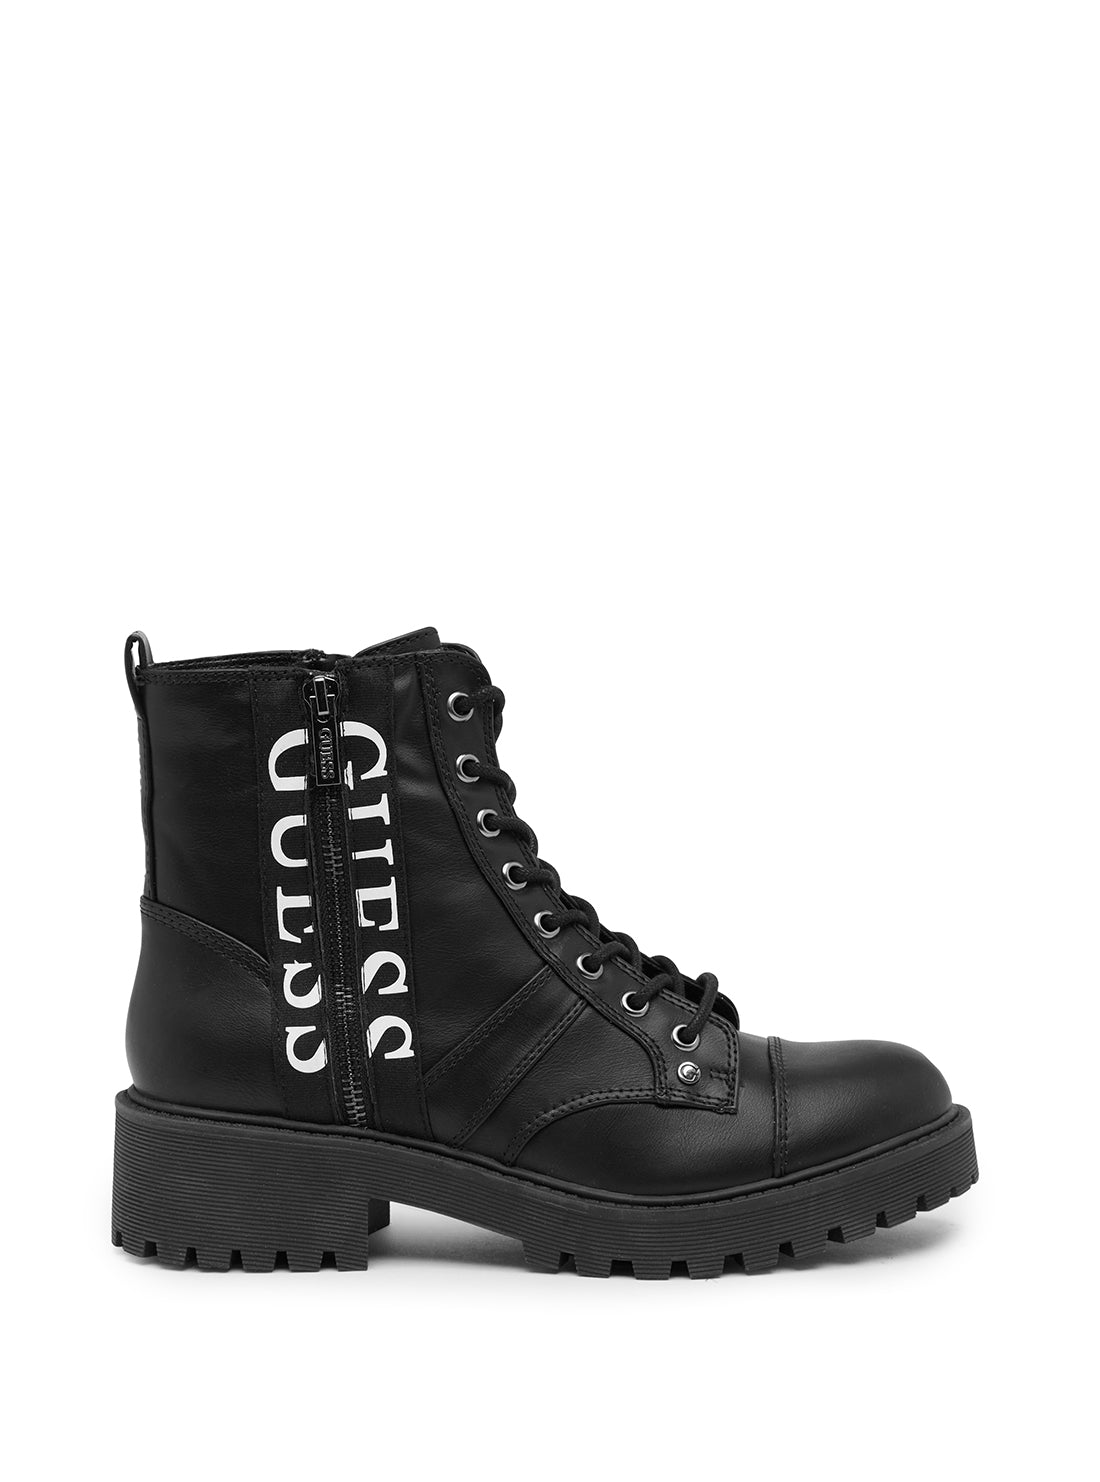 GUESS Women's Black Multi Those Logo Boots THOSE Side View